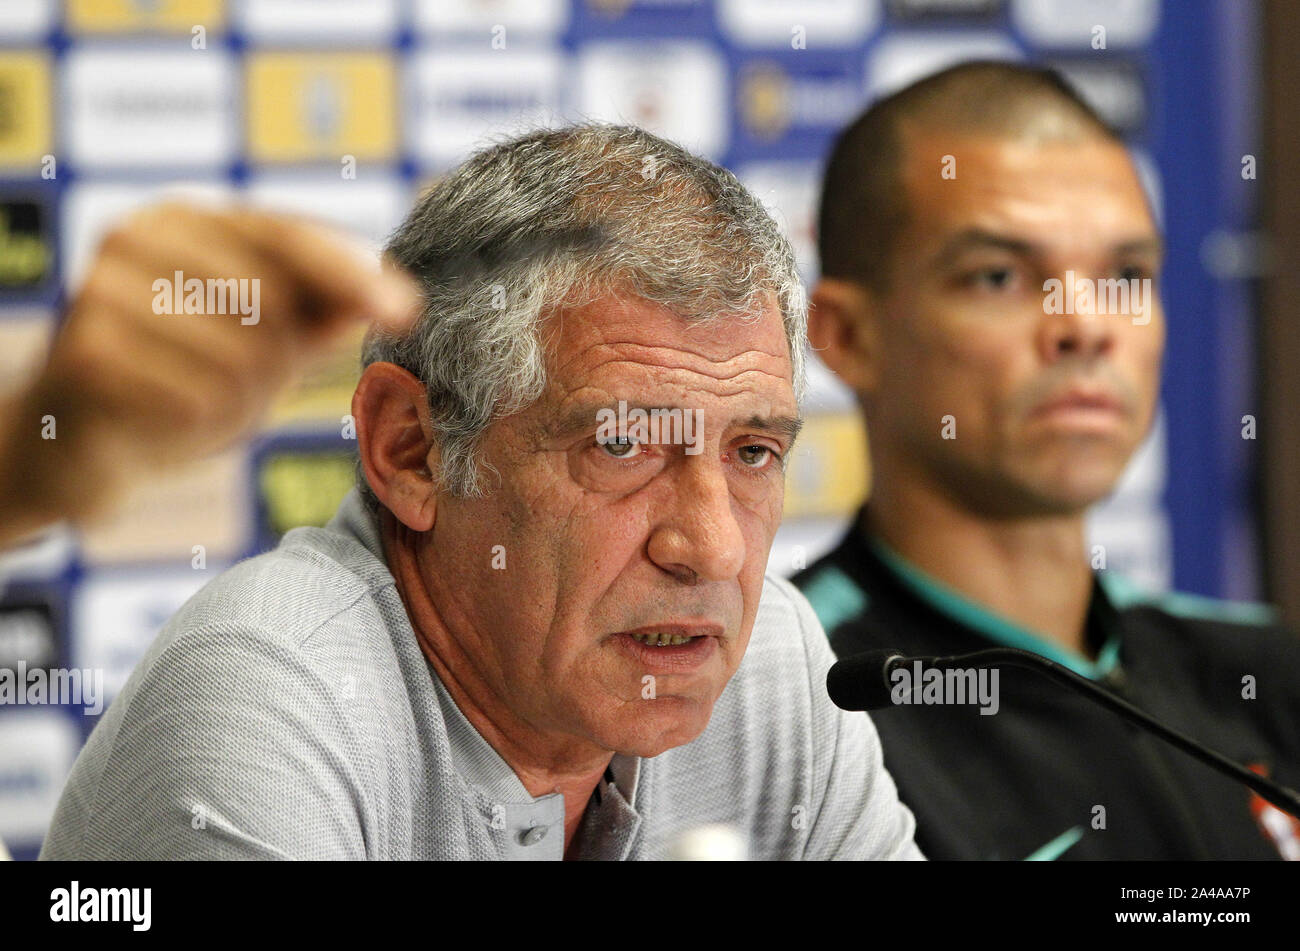 Kiev, Ukraine. 13th Oct, 2019. FERNANDO SANTOS (L), head coach of Portugal national team, and player PEPE (R) speak during a media conference at the Olimpiyskiy stadium in Kiev, Ukraine, 13 October 2019. Portugal will faces Ukraine in the UEFA Euro 2020 Qualifier Group B football match on 14 October. Credit: Serg Glovny/ZUMA Wire/Alamy Live News Stock Photo